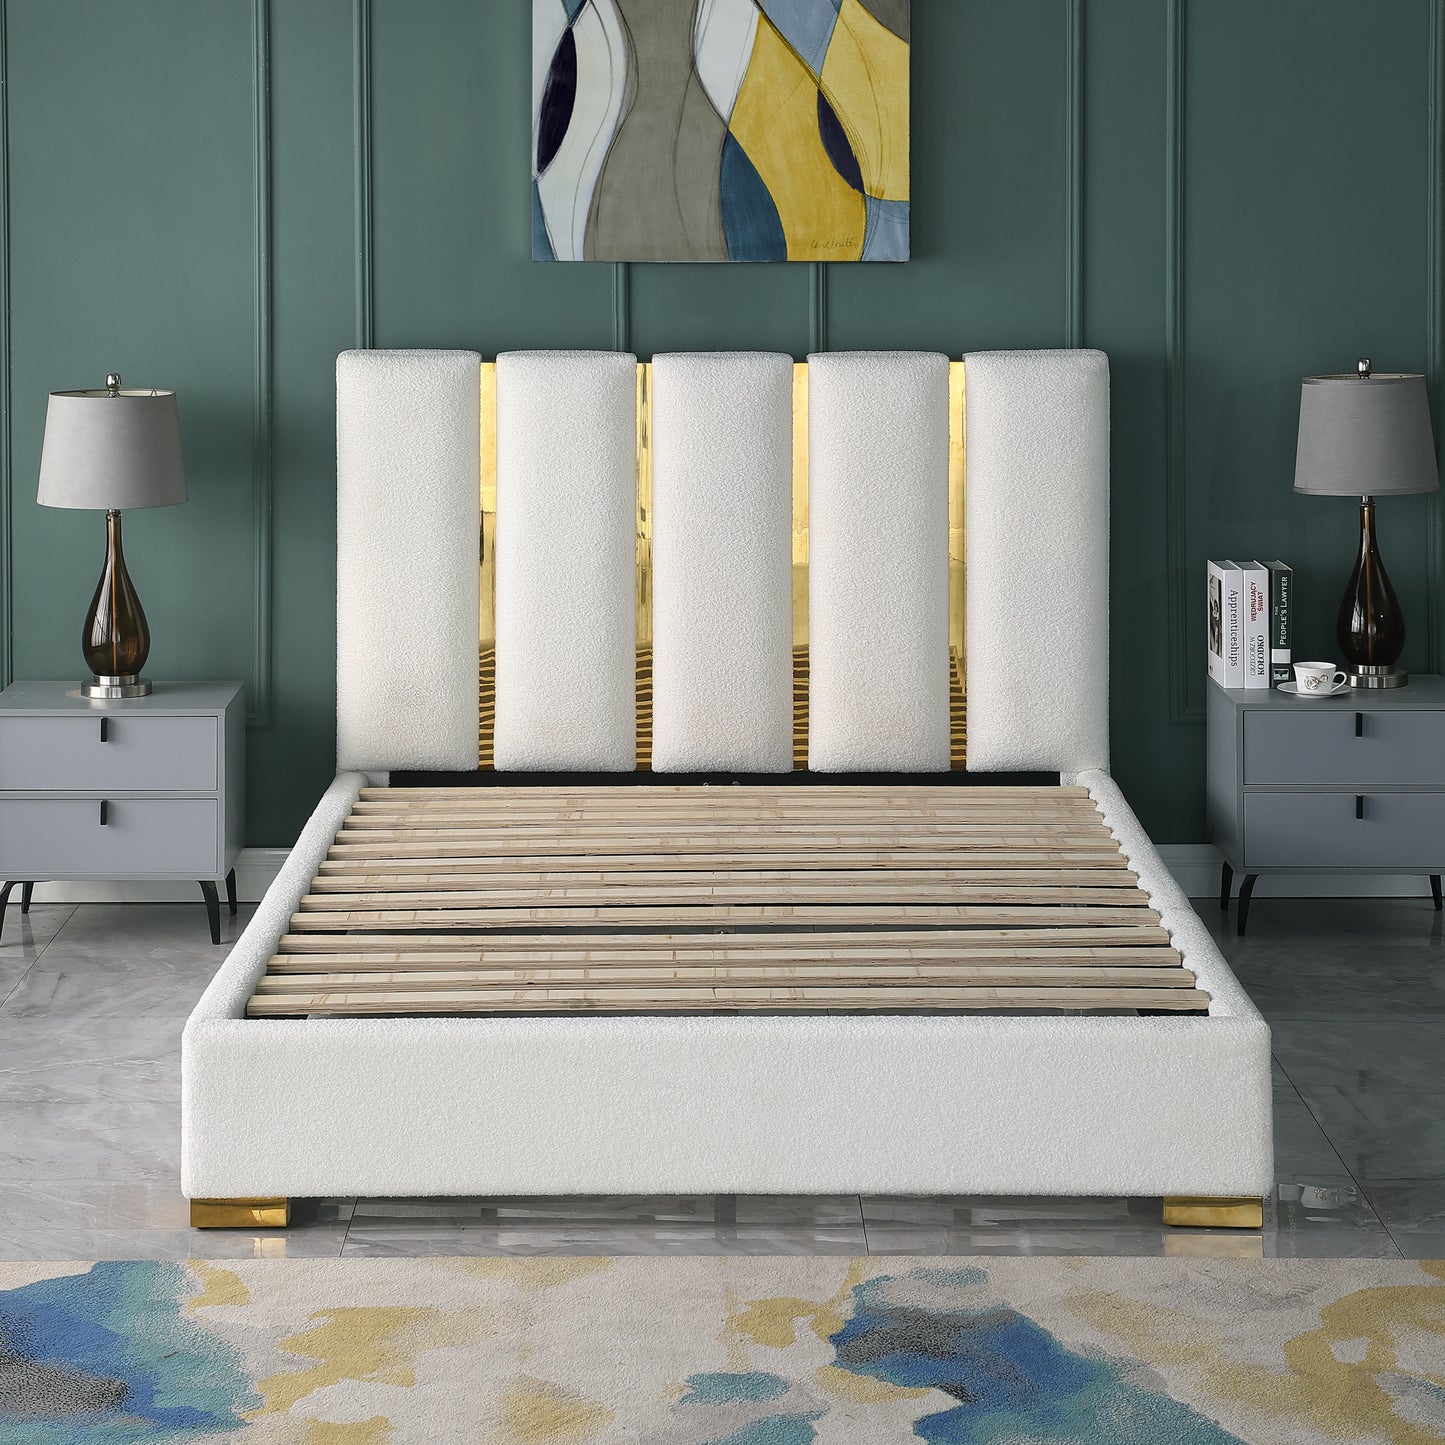 Contemporary Velvet Upholstered Bed, Solid Wood Frame, High-density Foam, Gold Metal Leg, Queen Size - Enova Luxe Home Store